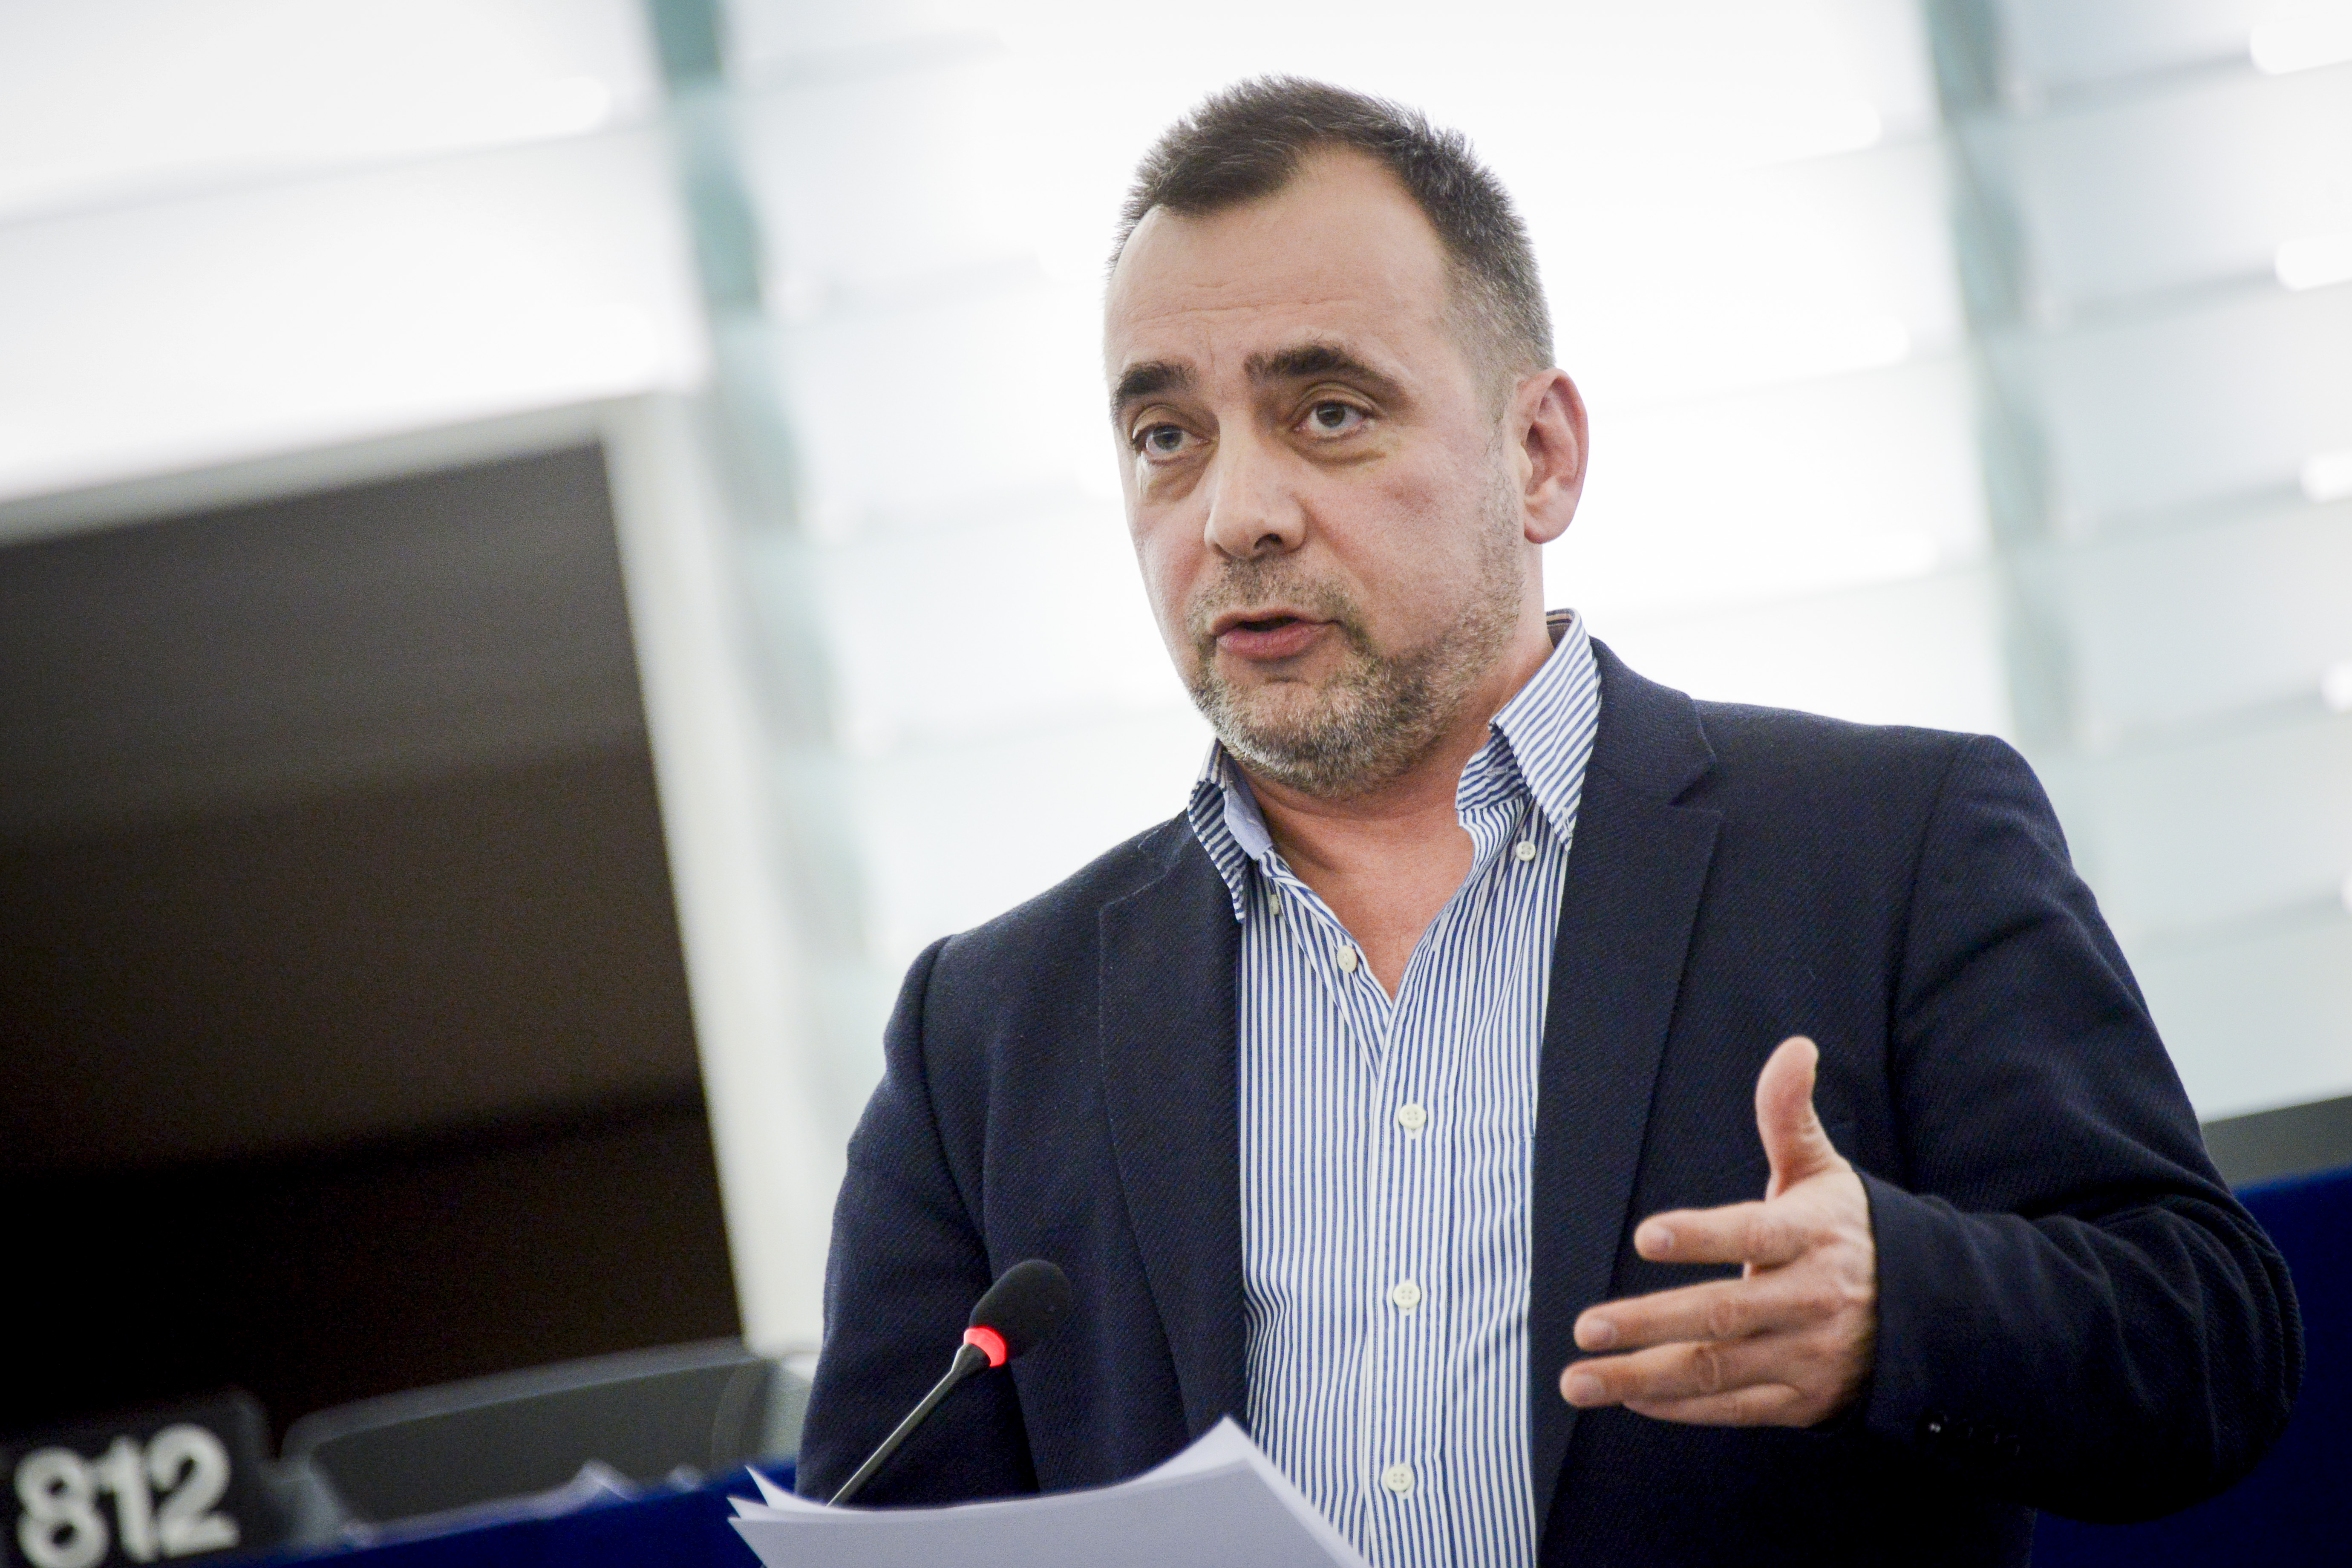 Green MEP, Tamás Meszerics, during a plenary session at Strasbourg's European Parliament (by ACN)